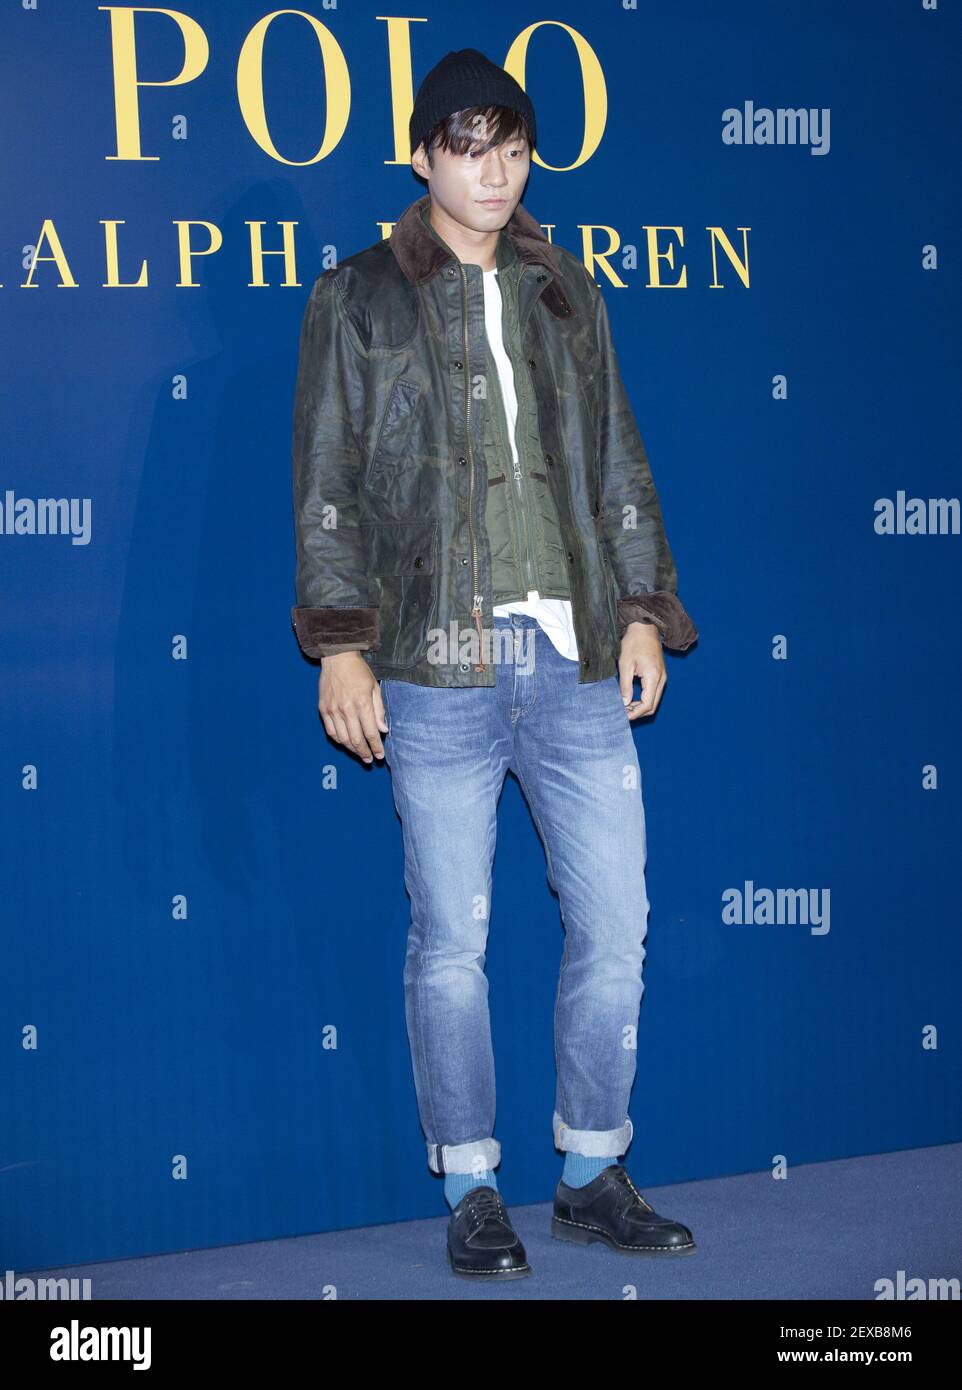 22 September 2015 - Seoul, South Korea : South Korean actor Lee Chun-hee,  attends a photo call for the Ralph Lauren fashion brand 'POLO' free  standing store opening ceremony in Seoul, South